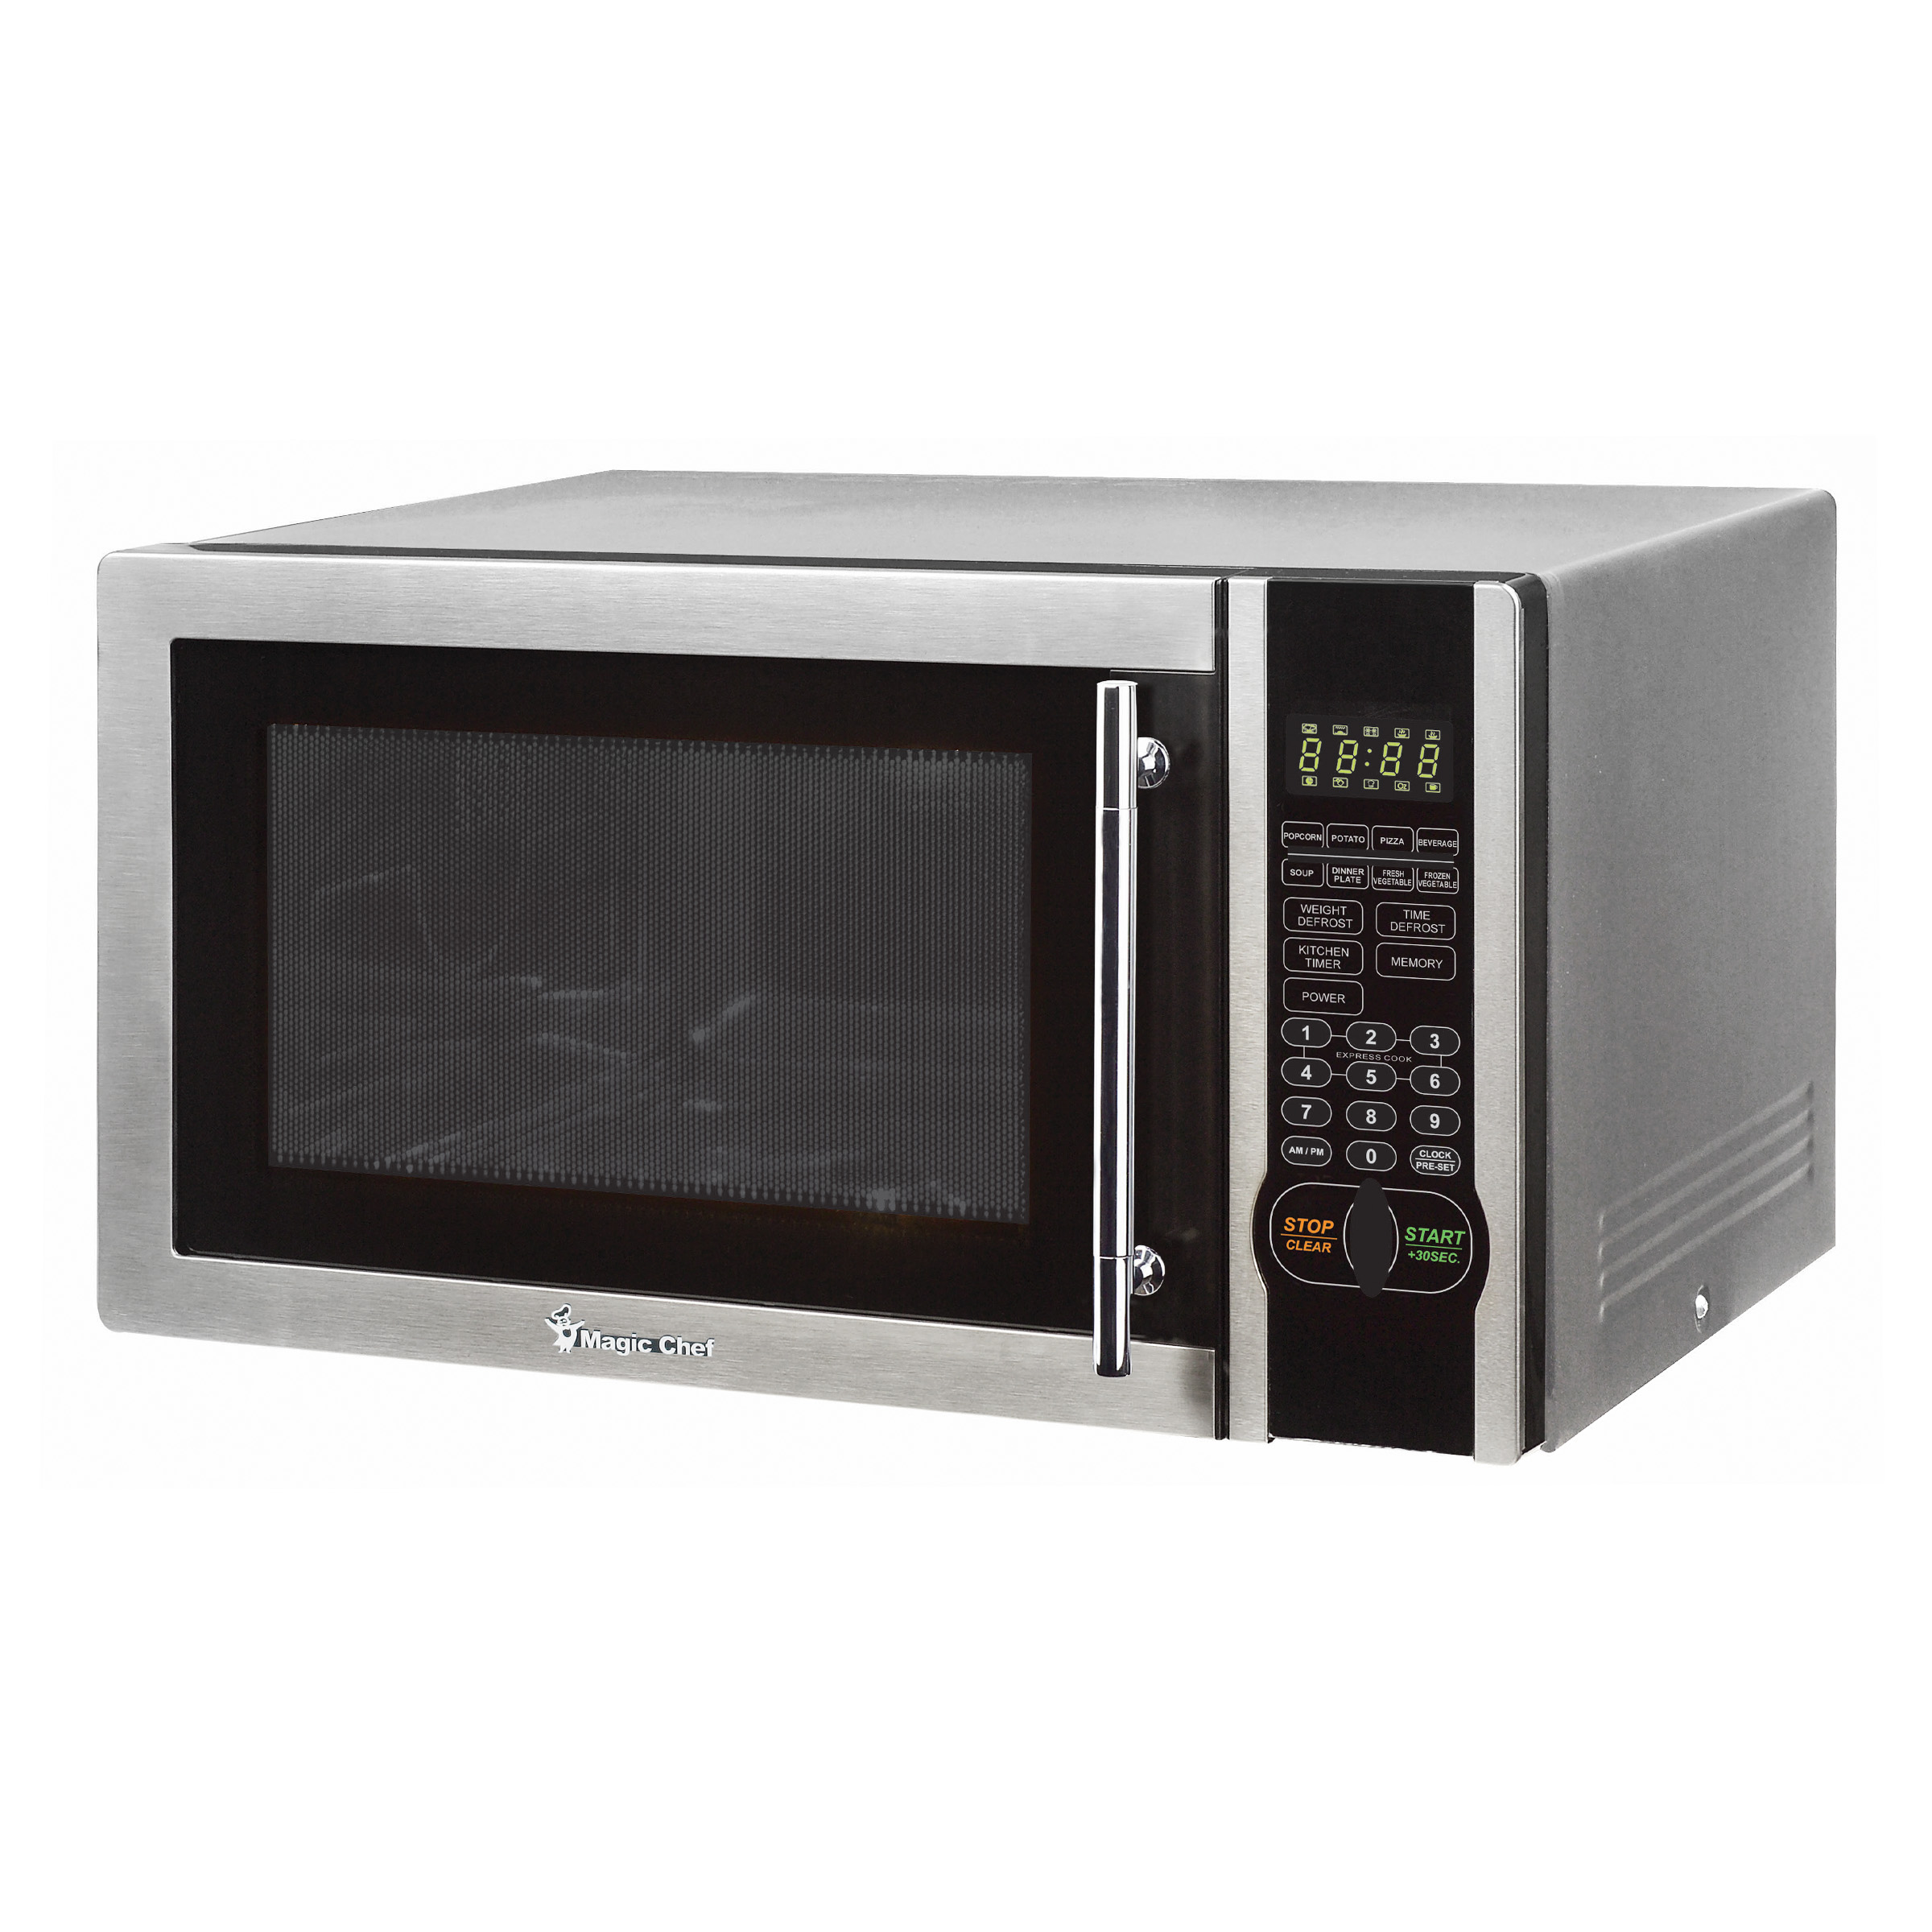 Magic Chef New1.1- Cu. ft. 1000W Countertop Microwave Oven with Stylish Door Handle, Stainless Steel - image 4 of 5